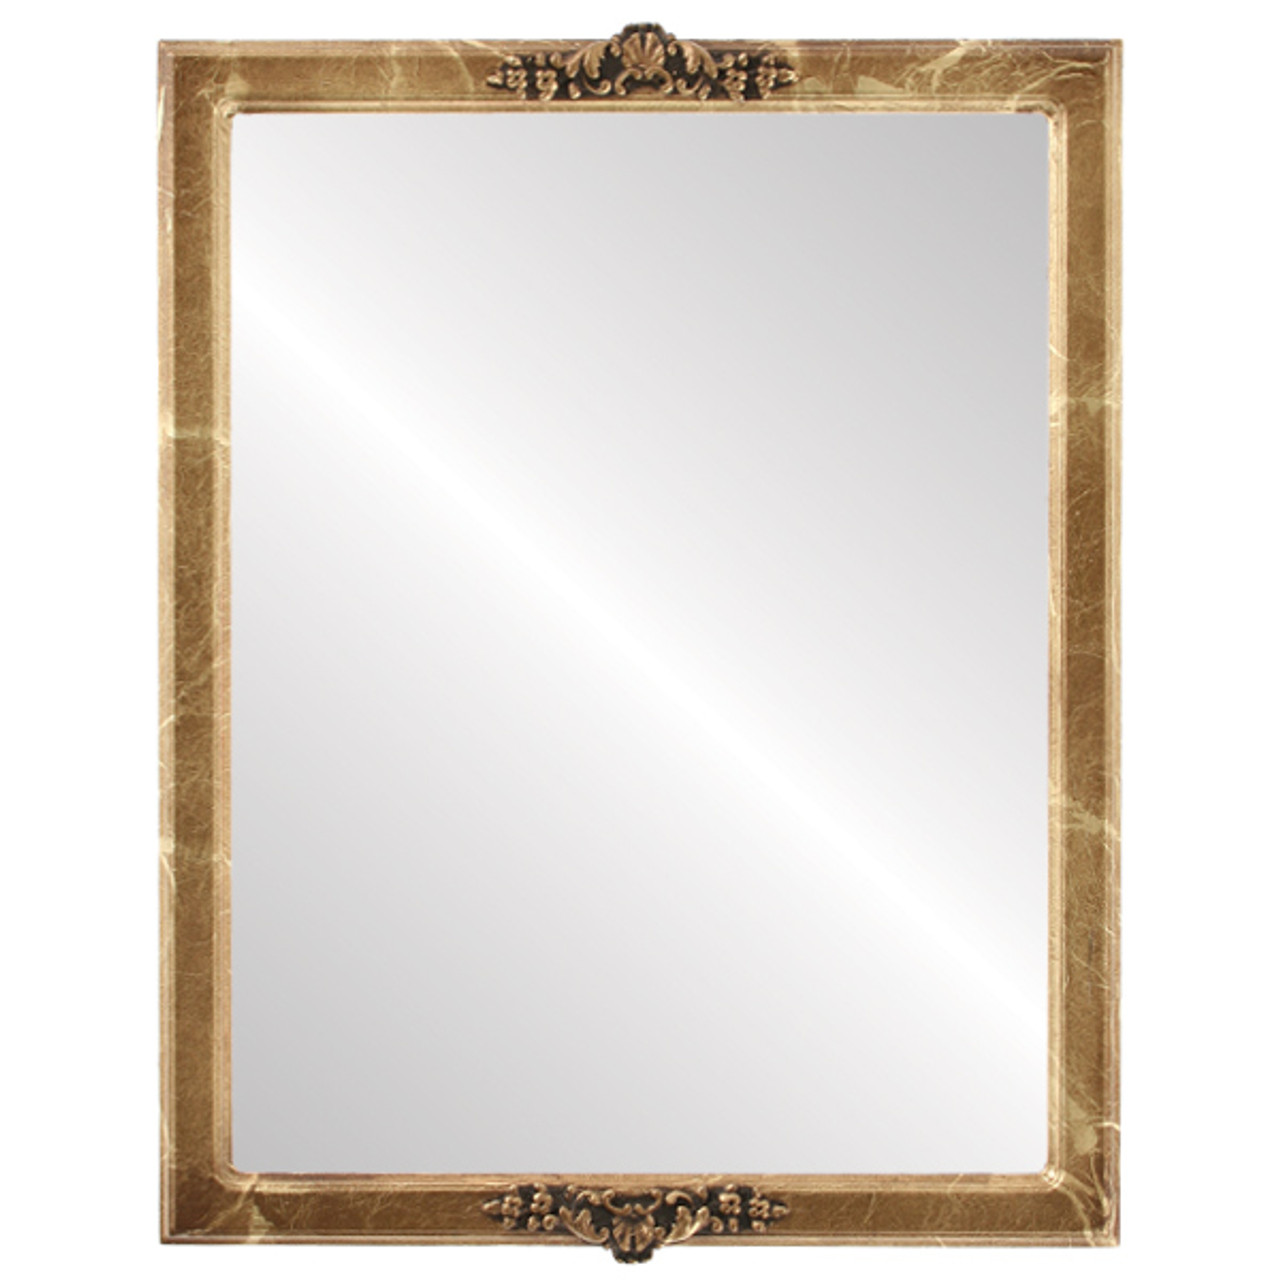 Rectangle Beveled Wall Mirror for Home Decor Jefferson Style Antique Wh - 2